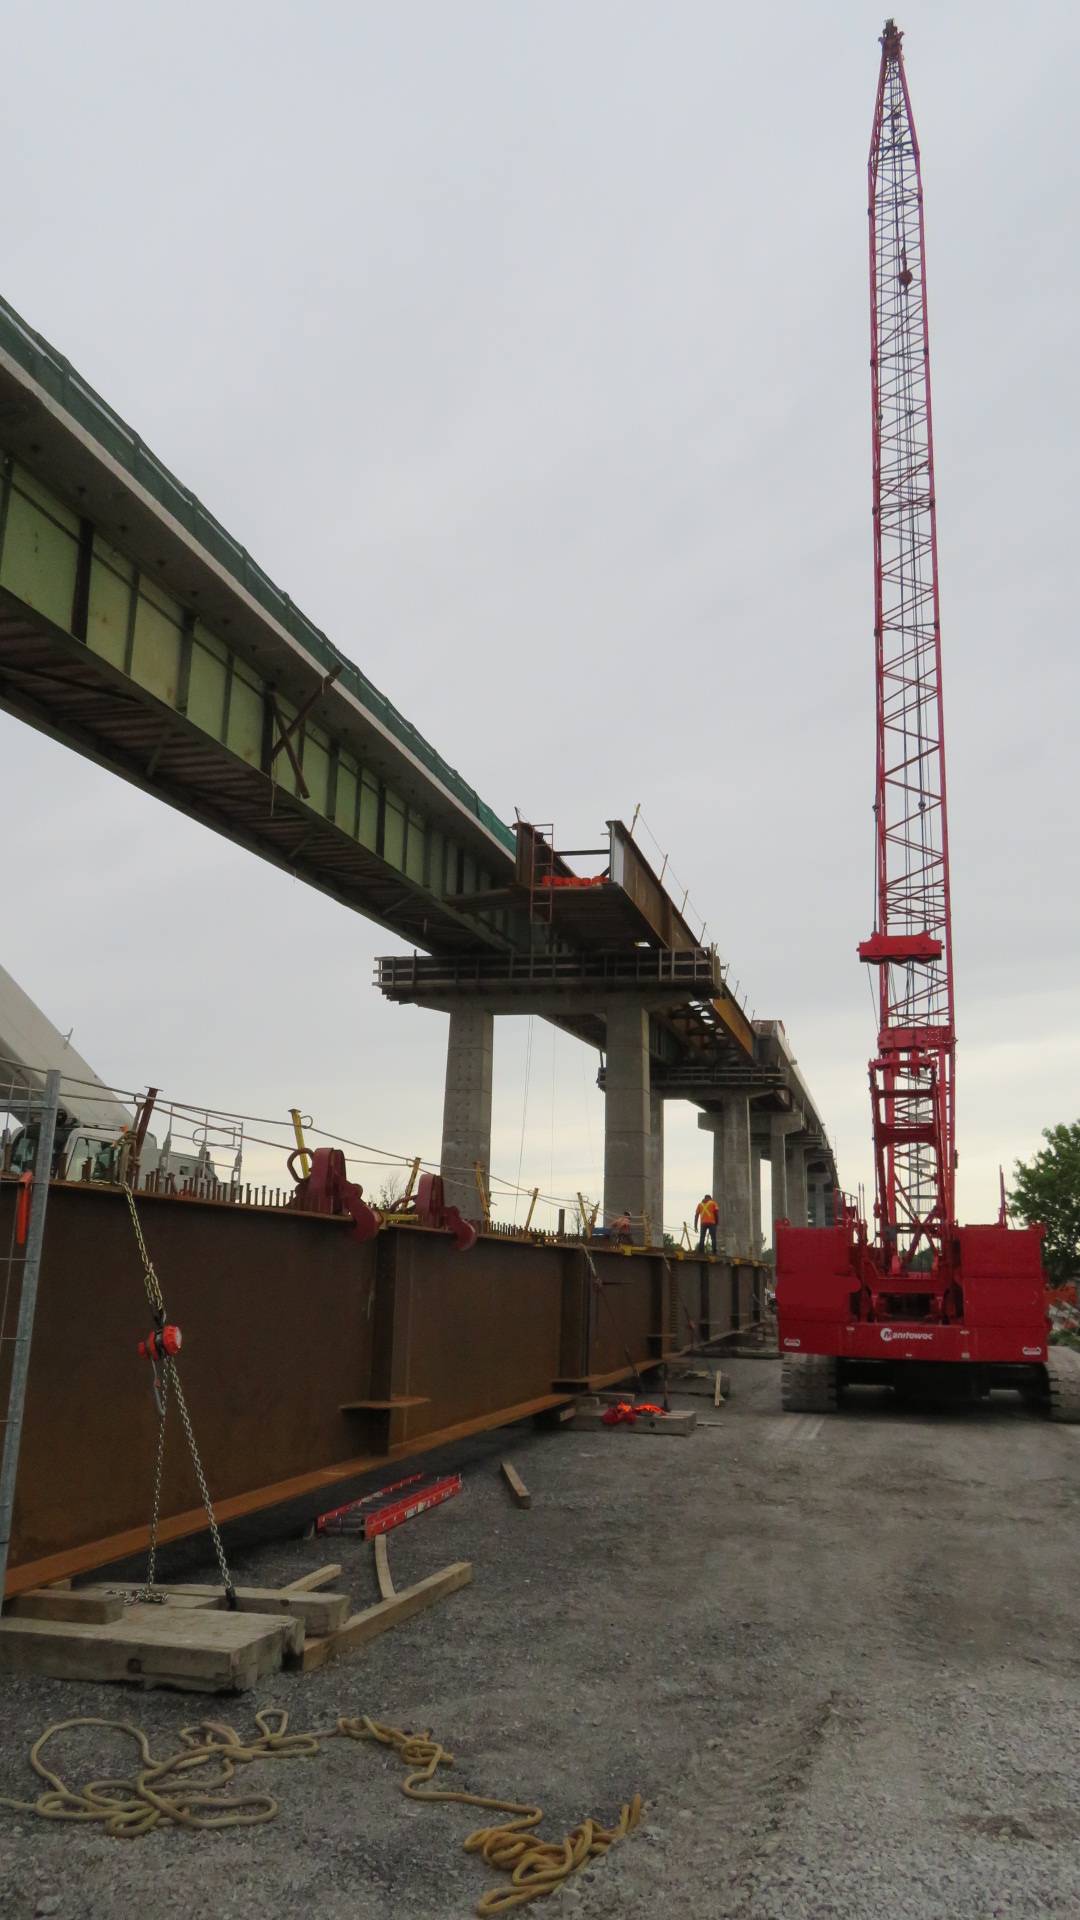 Next section of girder to be installed from pier 15-16, installed girder piers 14-15